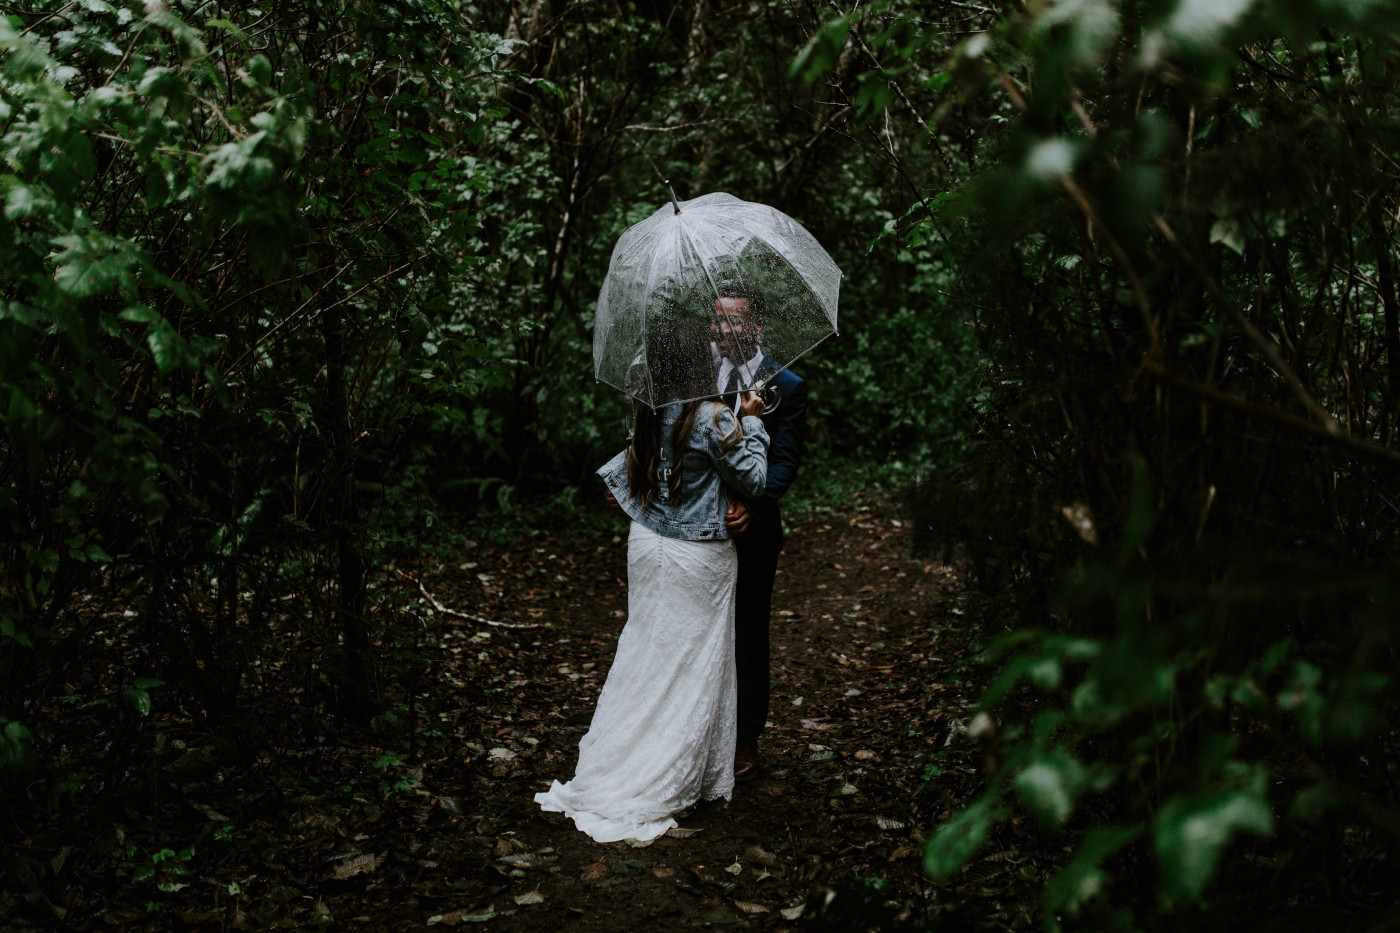 Deandre and Ariana stand together under an umbrella. Elopement photography at Mount Hood by Sienna Plus Josh.